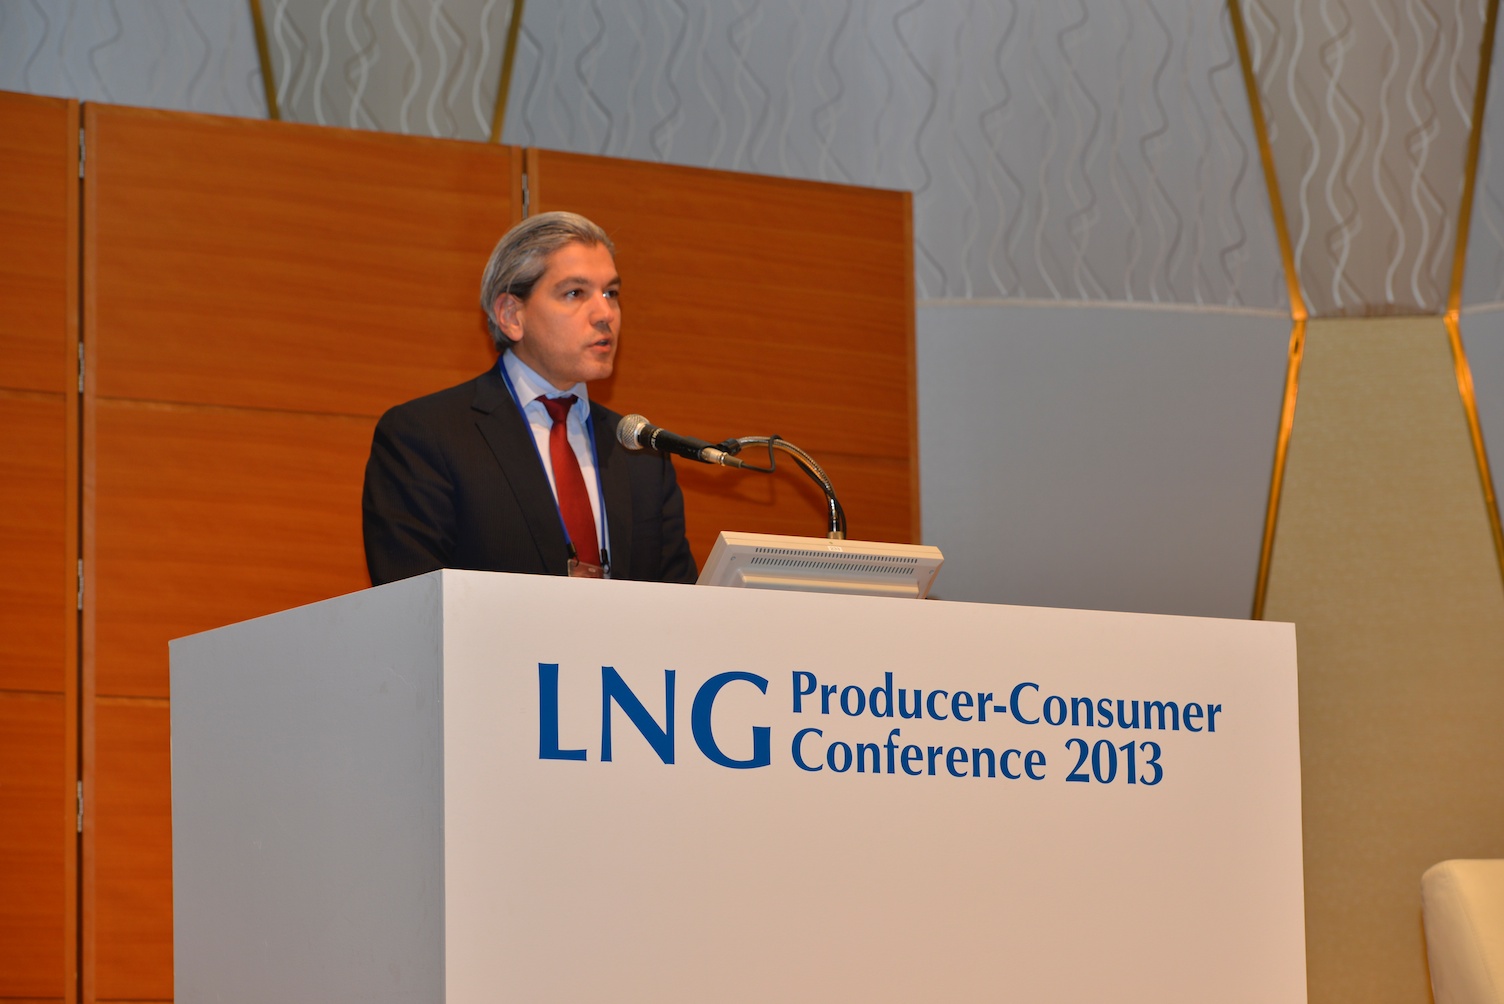 LNG Producer Consumer Conference 2013  (7)  09 10 2013